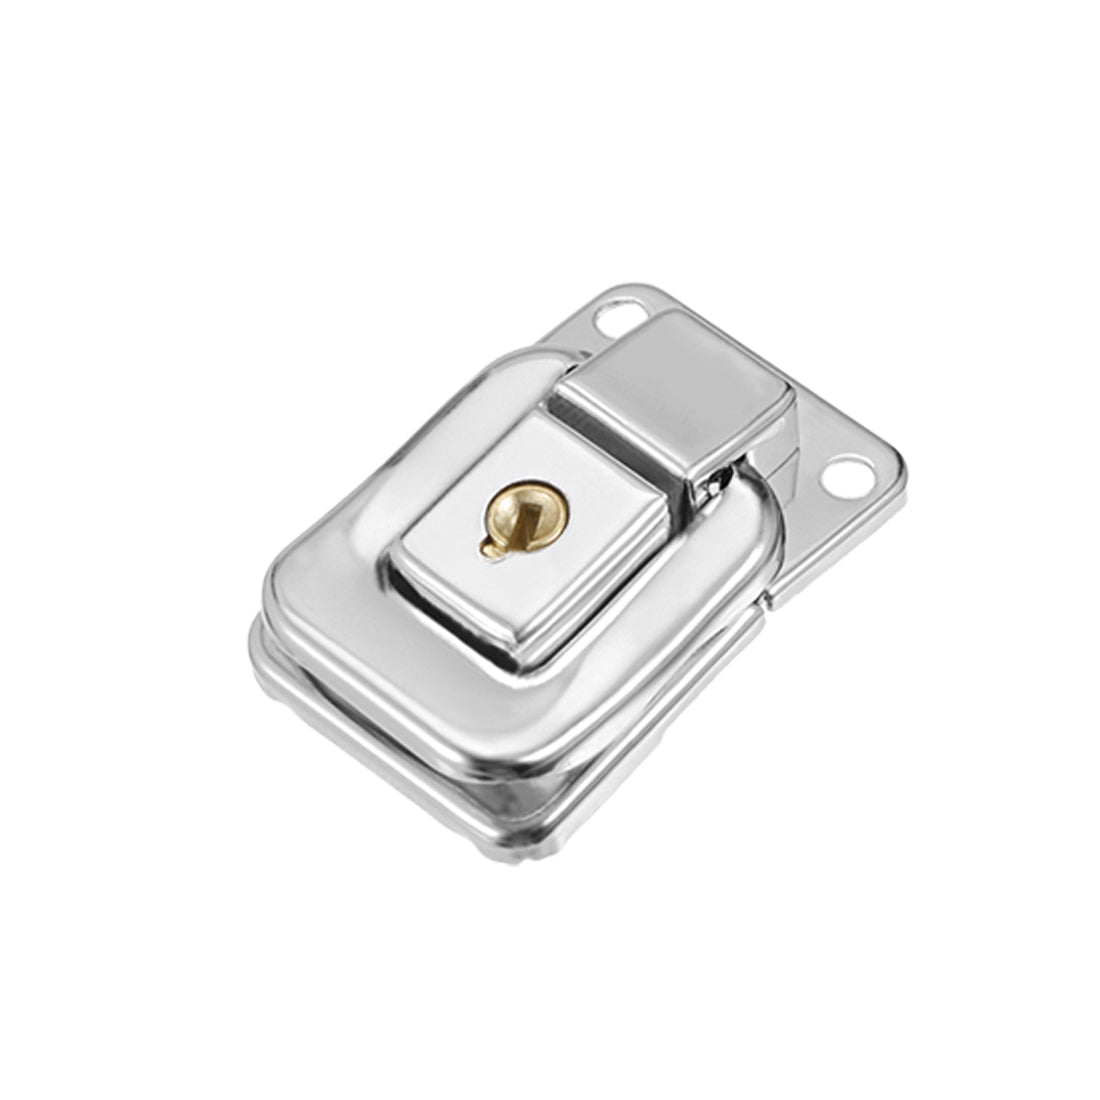 uxcell Uxcell 41mm x 28mm Metal Small Size Suitcase Hasp Catch Latch with Keys and Screws